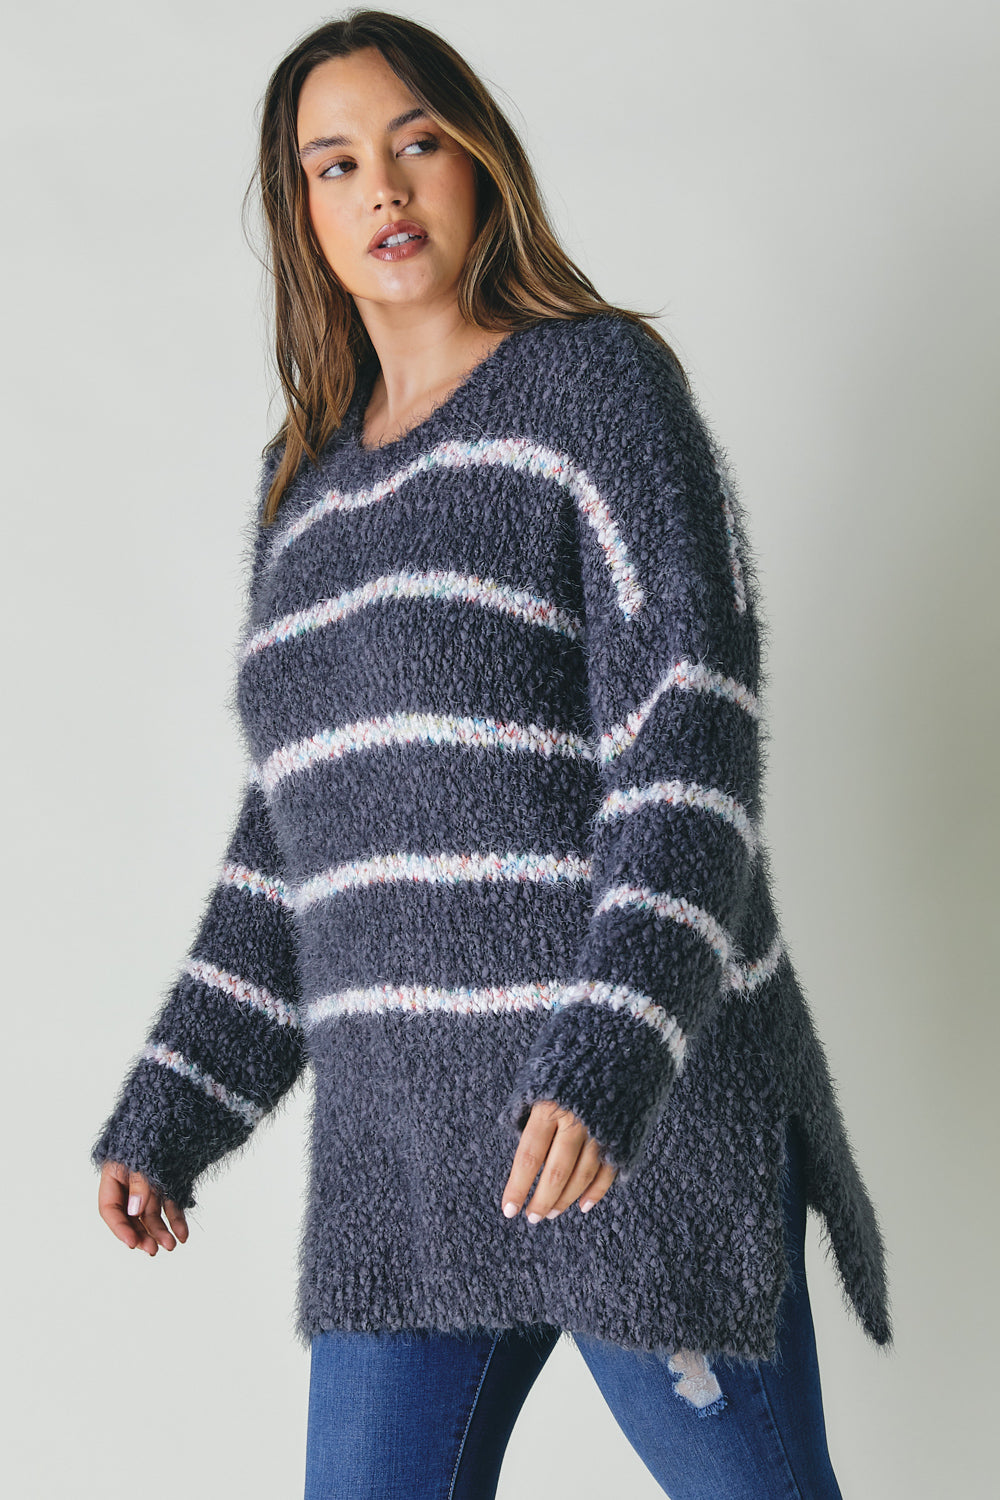 Sweater With Stripe Detail